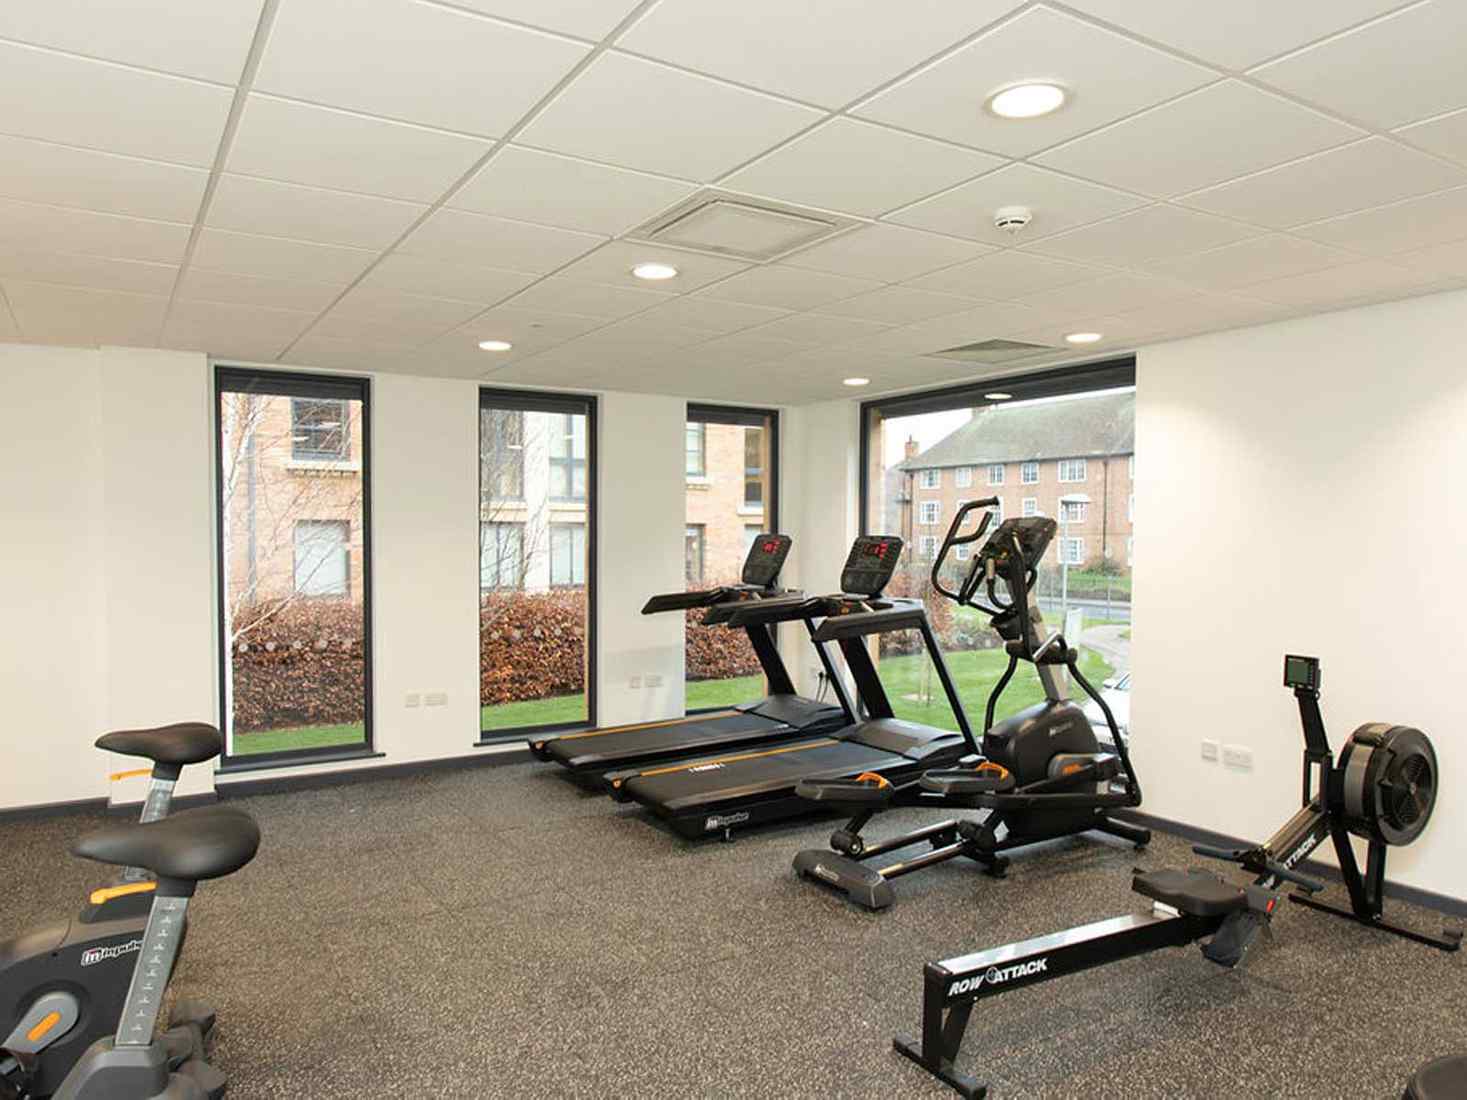 Shared gym facilities at Abode accommodation site. 